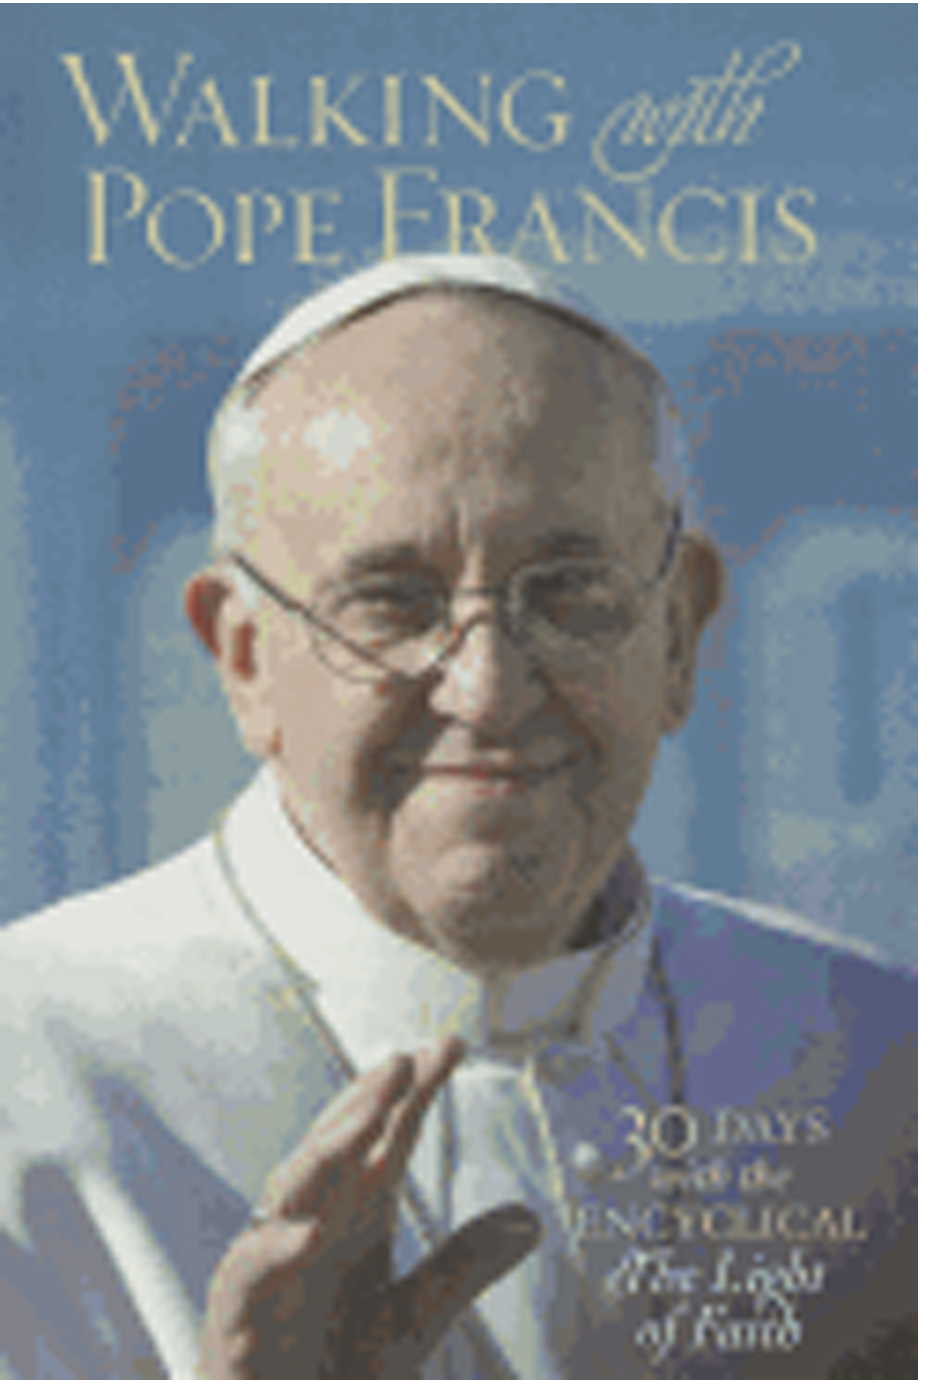 Walking With Pope Francis by Gwen Costello 108-9781627850025